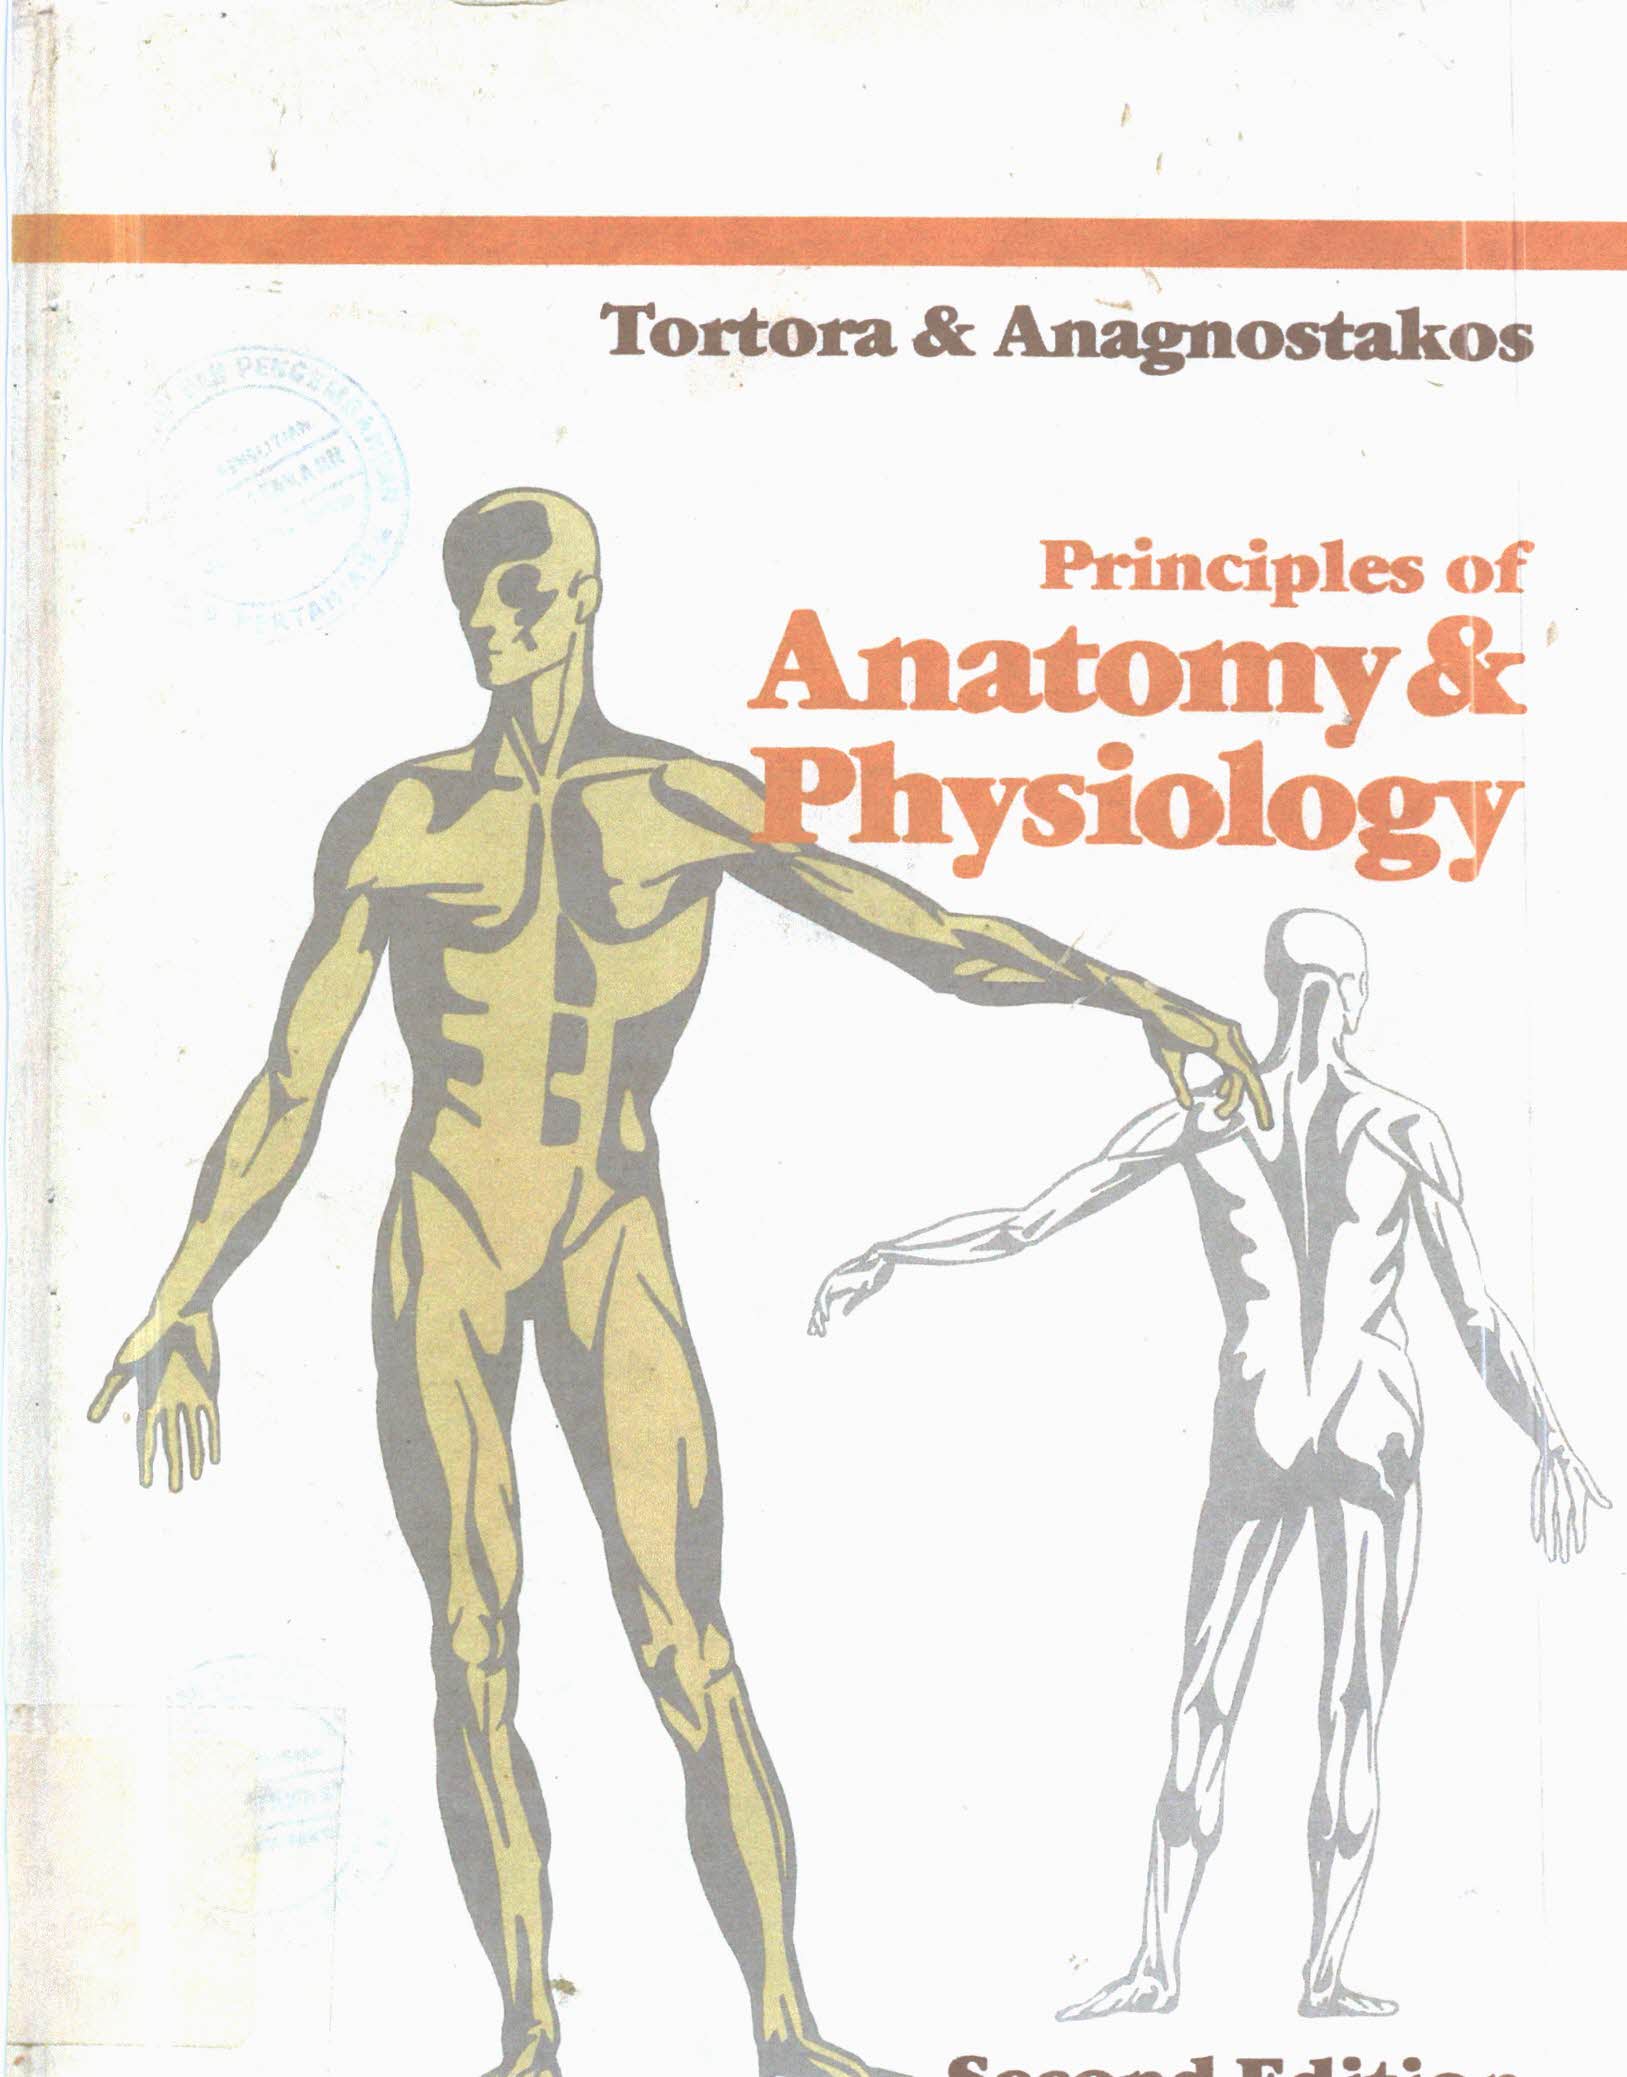 Principles of anatomy & physiology